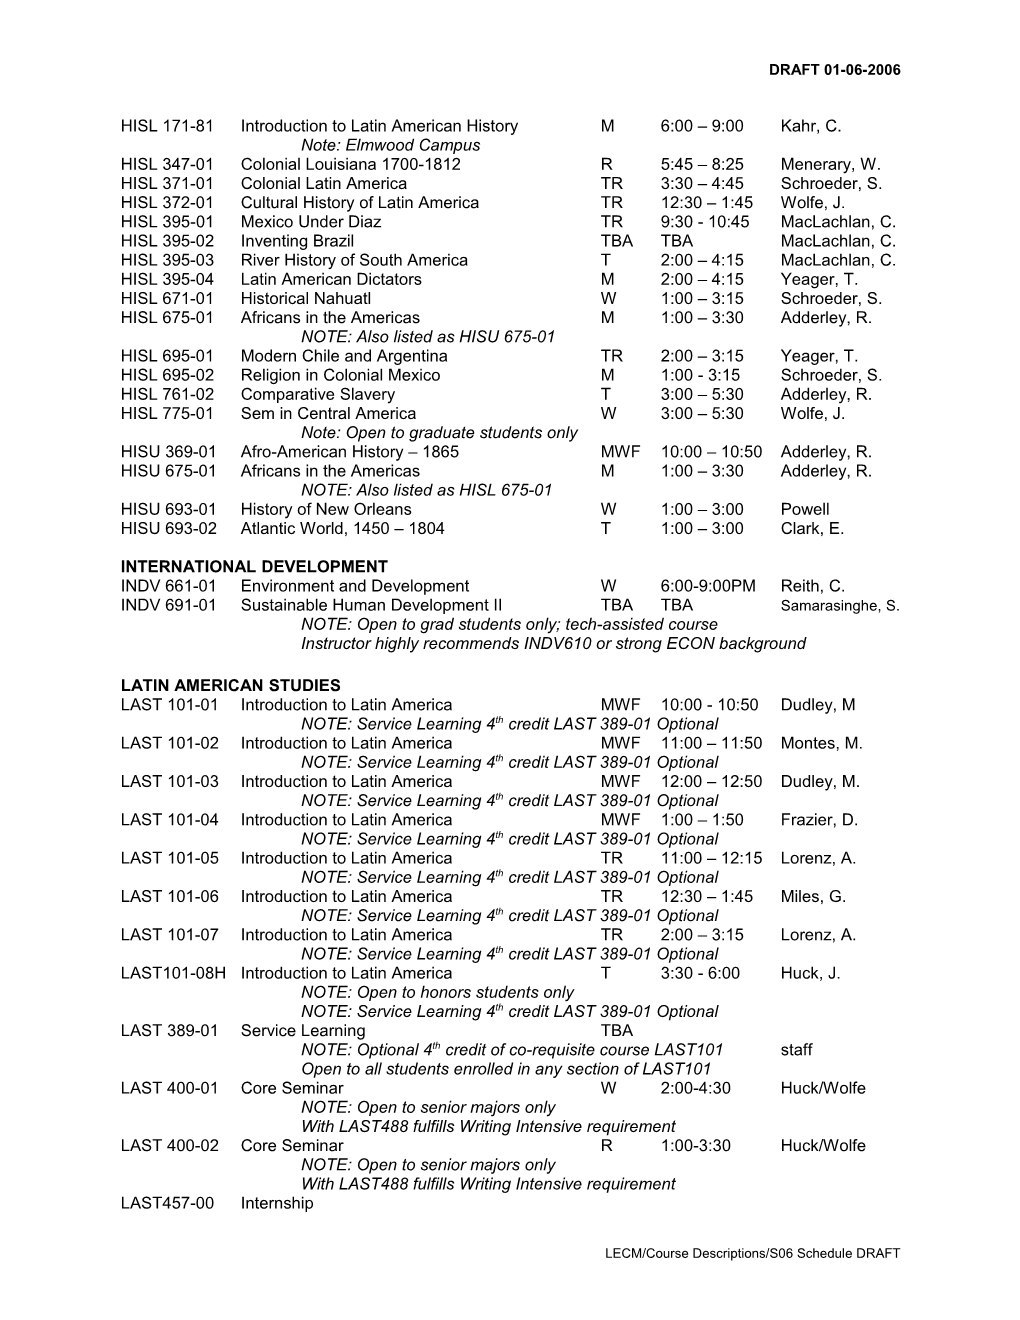 Spring 2003 Schedule of Classes